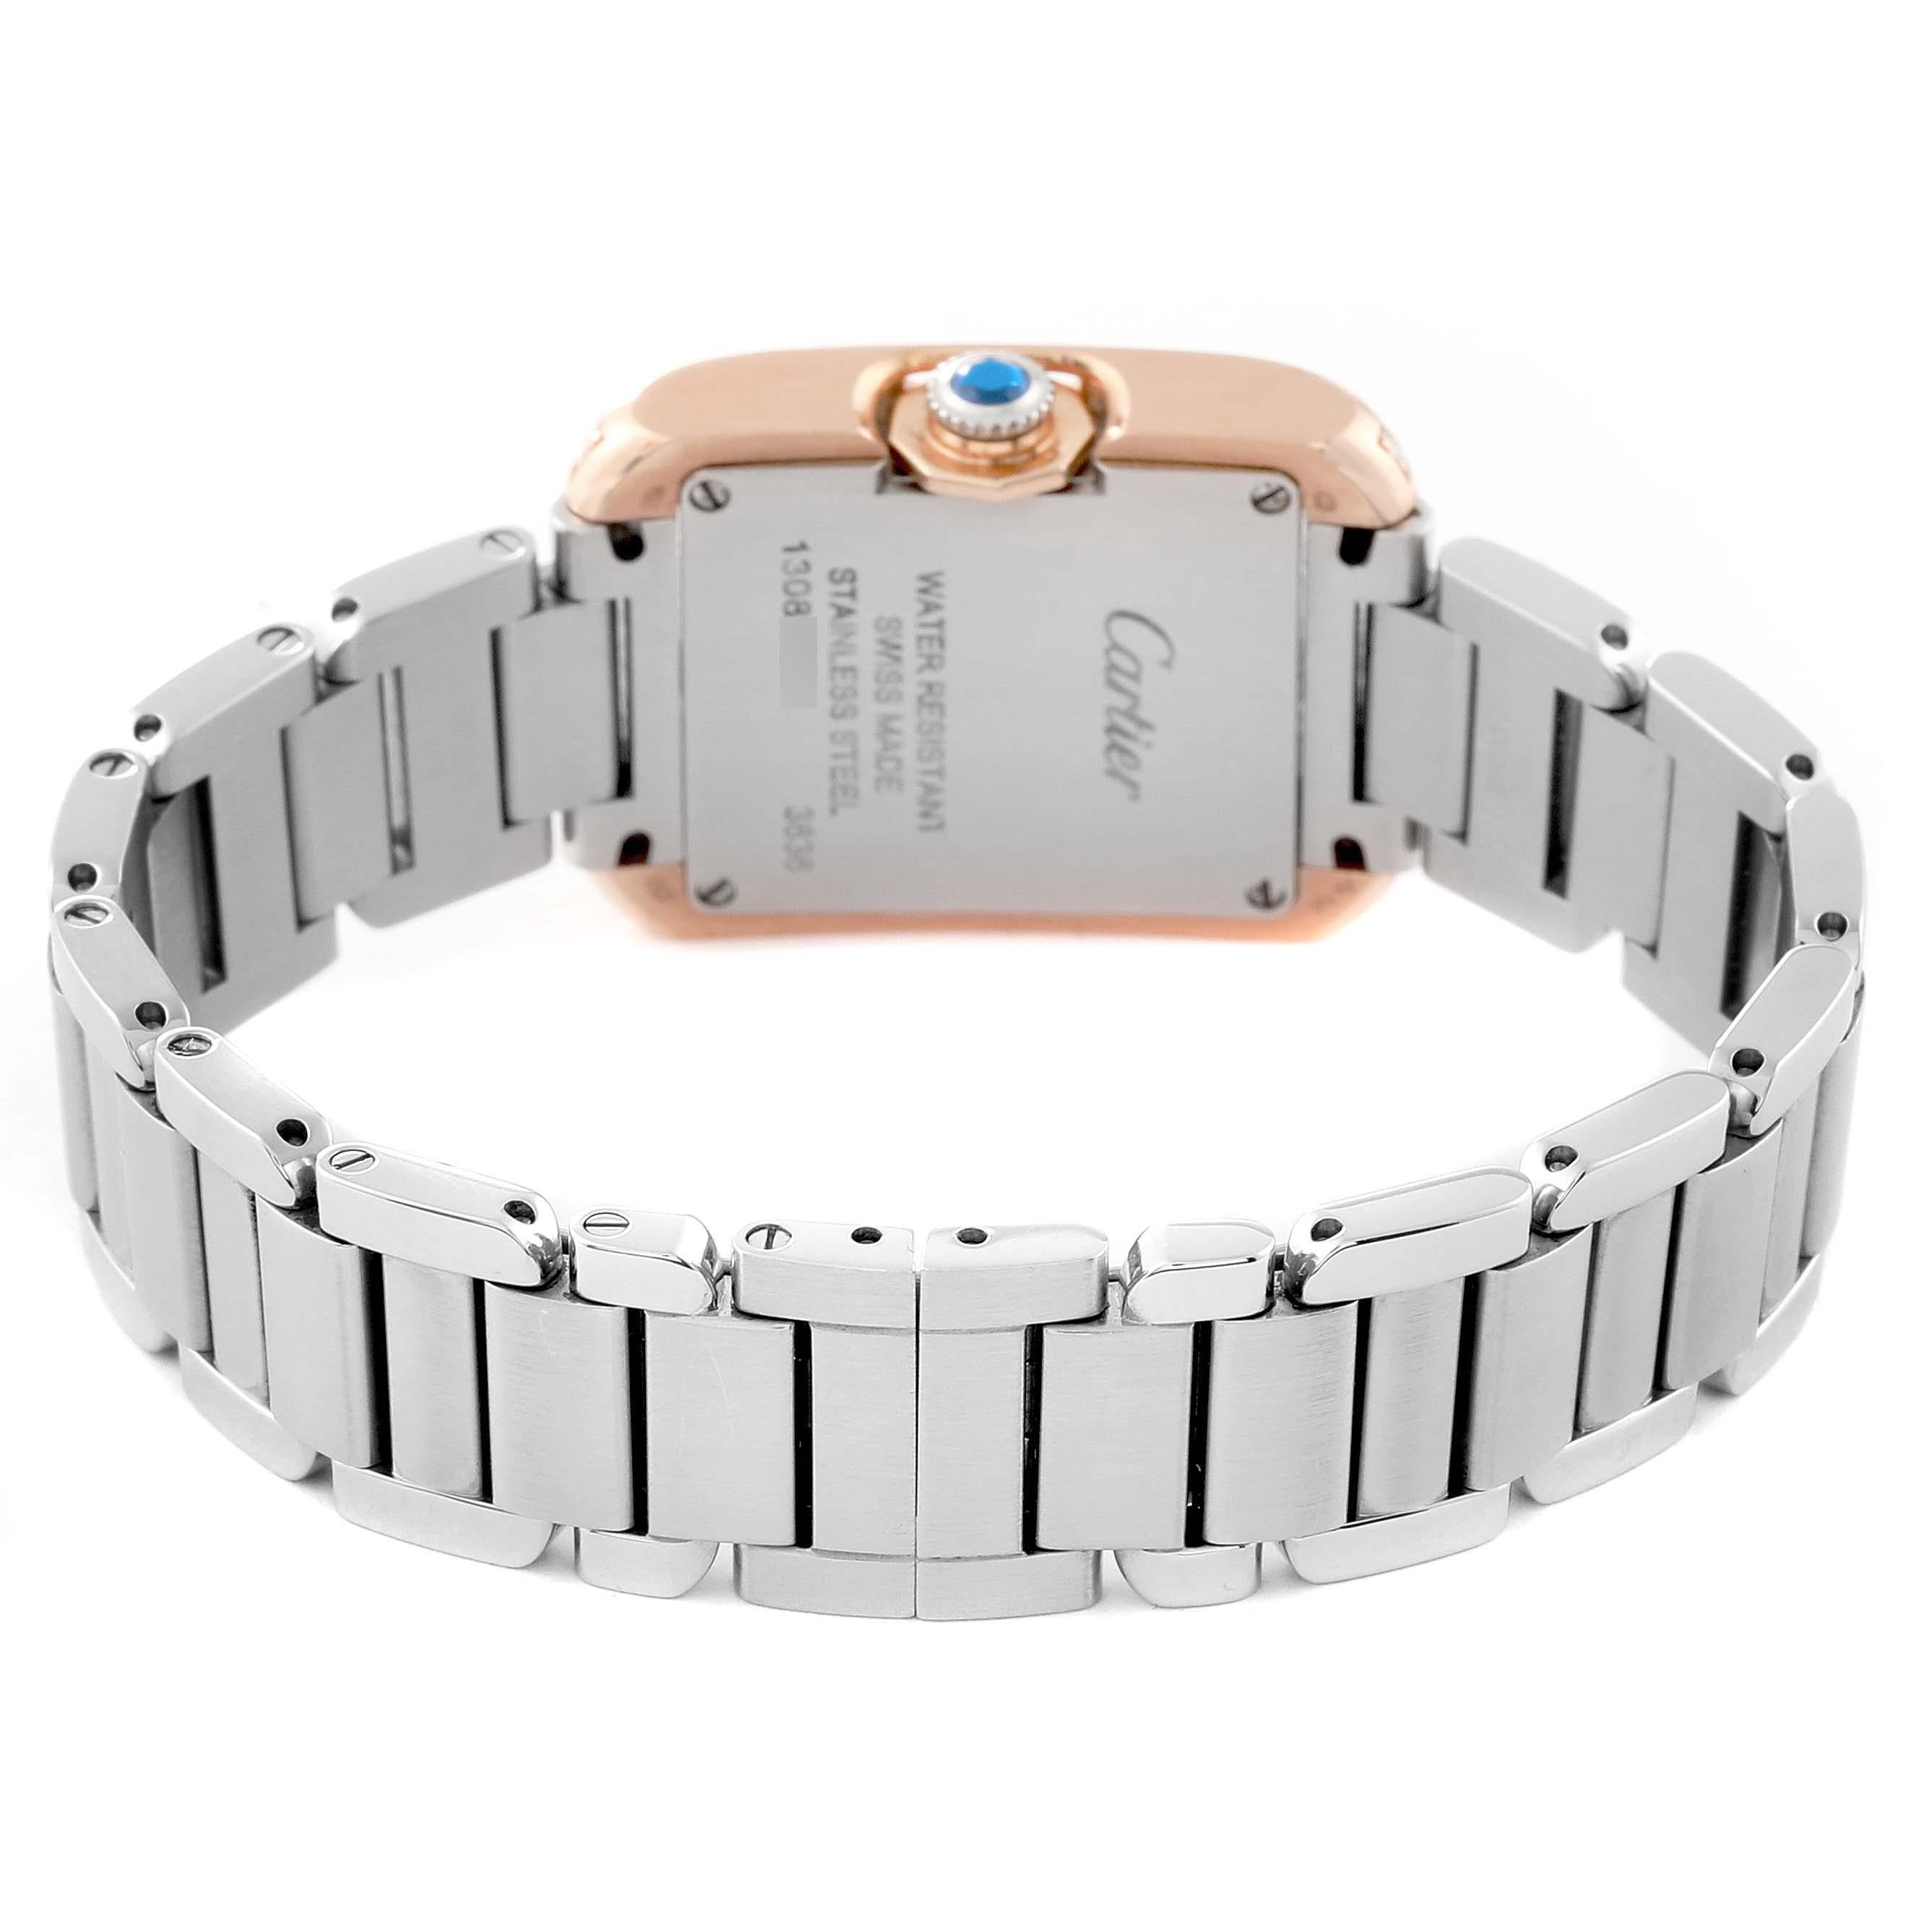 Cartier Tank Anglaise Steel Rose Gold Diamond Ladies Watch W3TA0002 Box Card For Sale 1